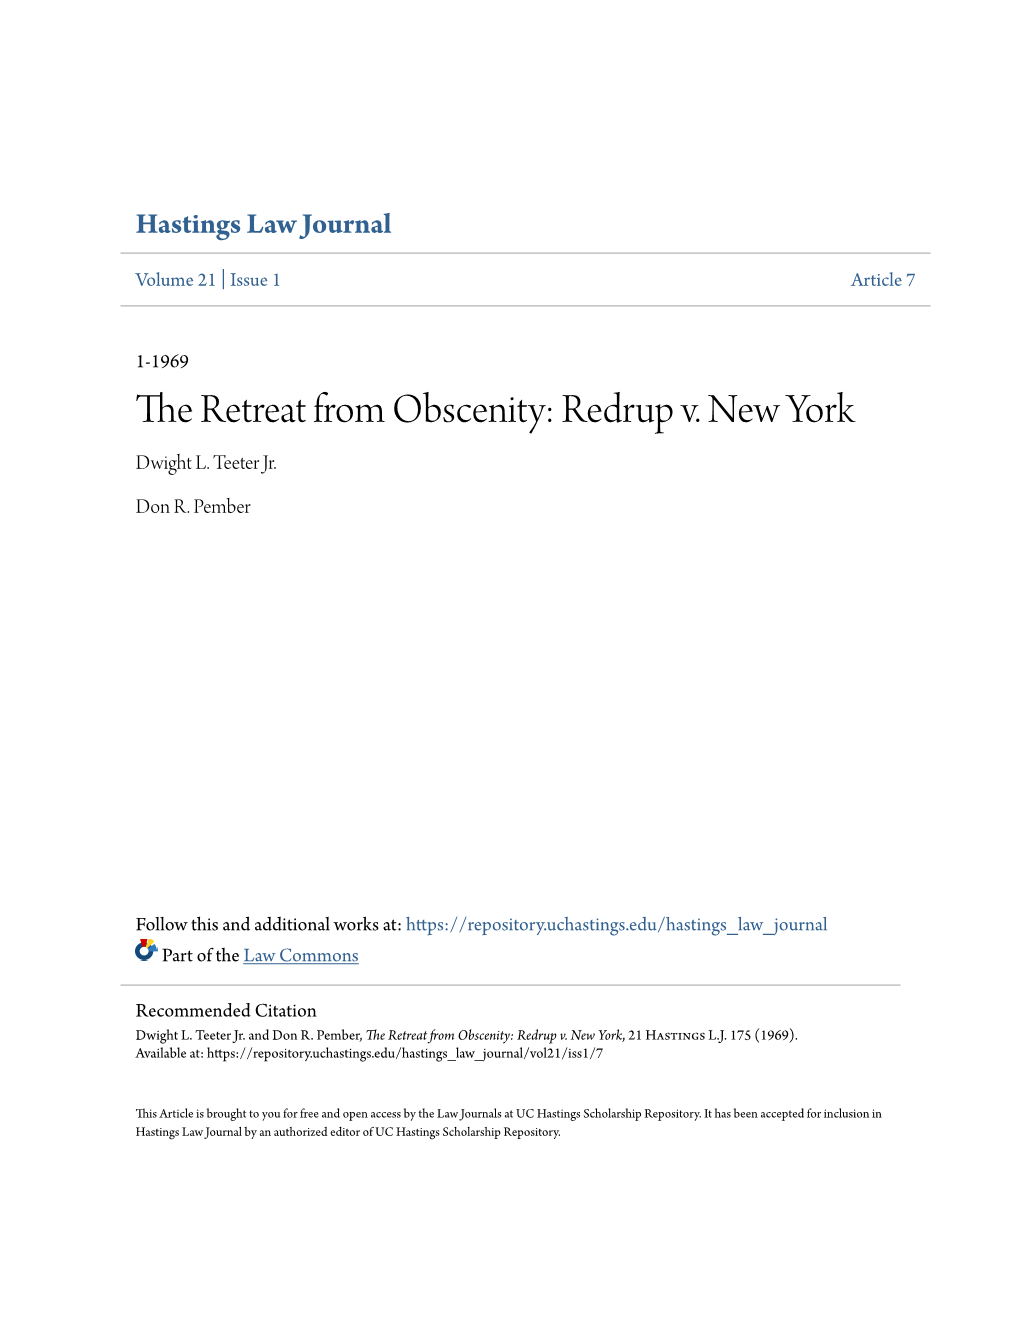 The Retreat from Obscenity: Redrup V. New York Dwight L